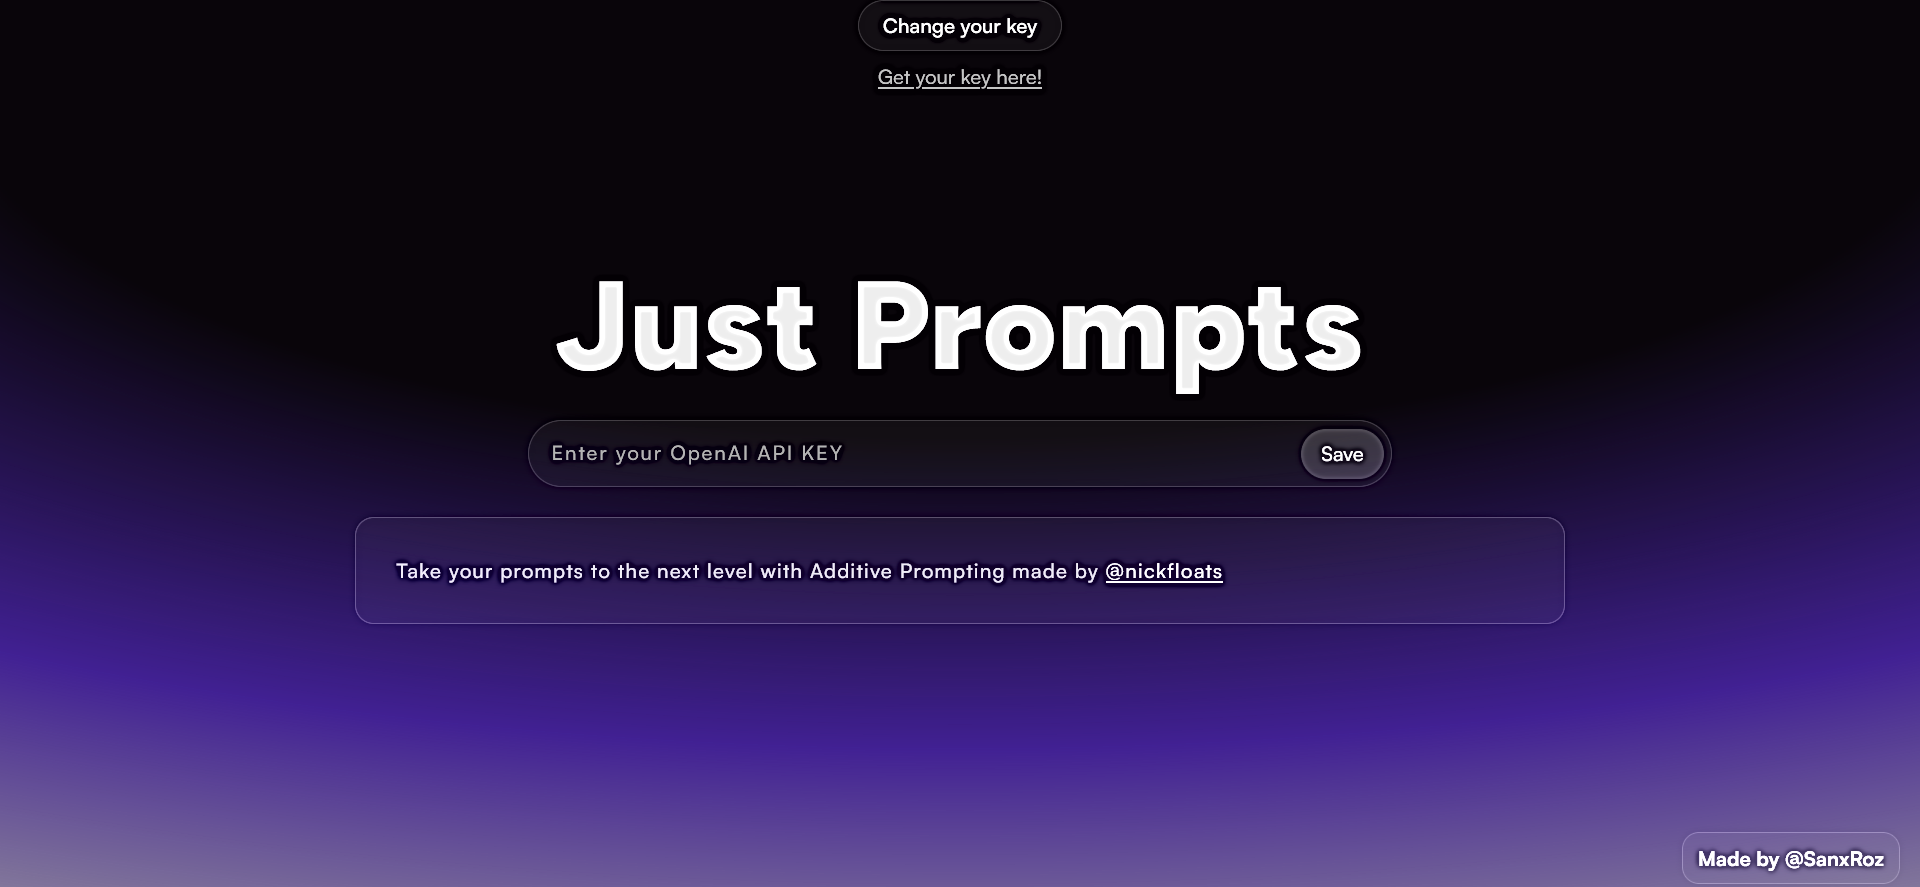 Just Prompts featured